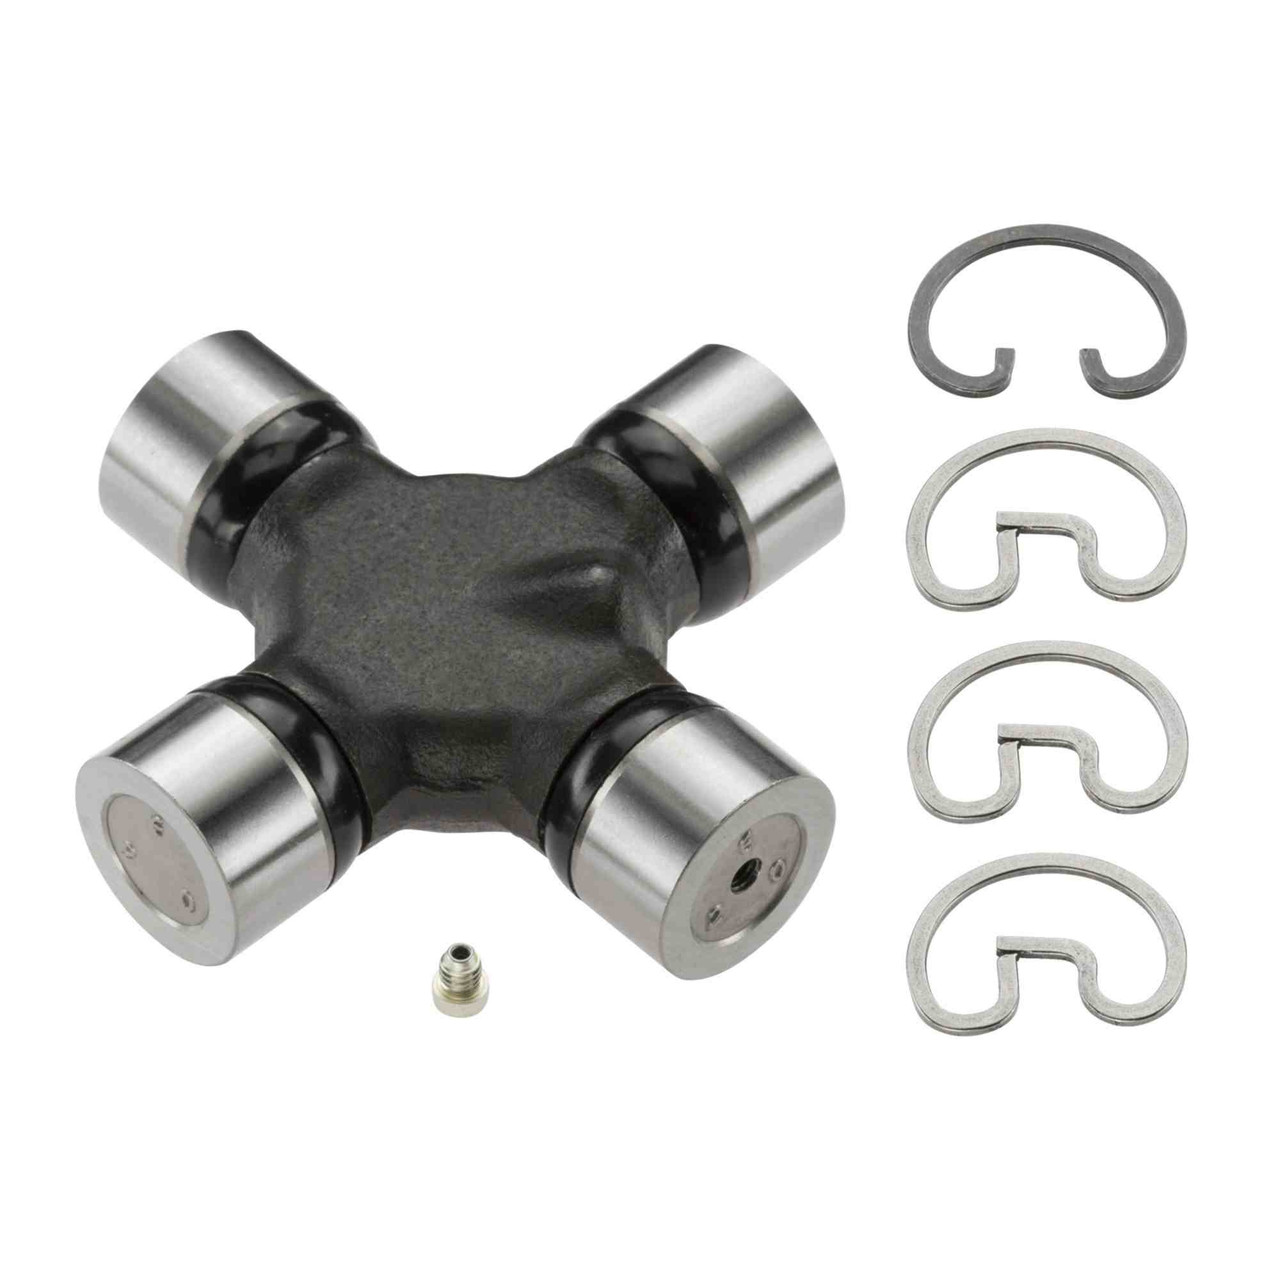 U-Joint- Toyota Tundra, Tacoma & Sequoia Greaseable Super Strength Universal Joint 270

